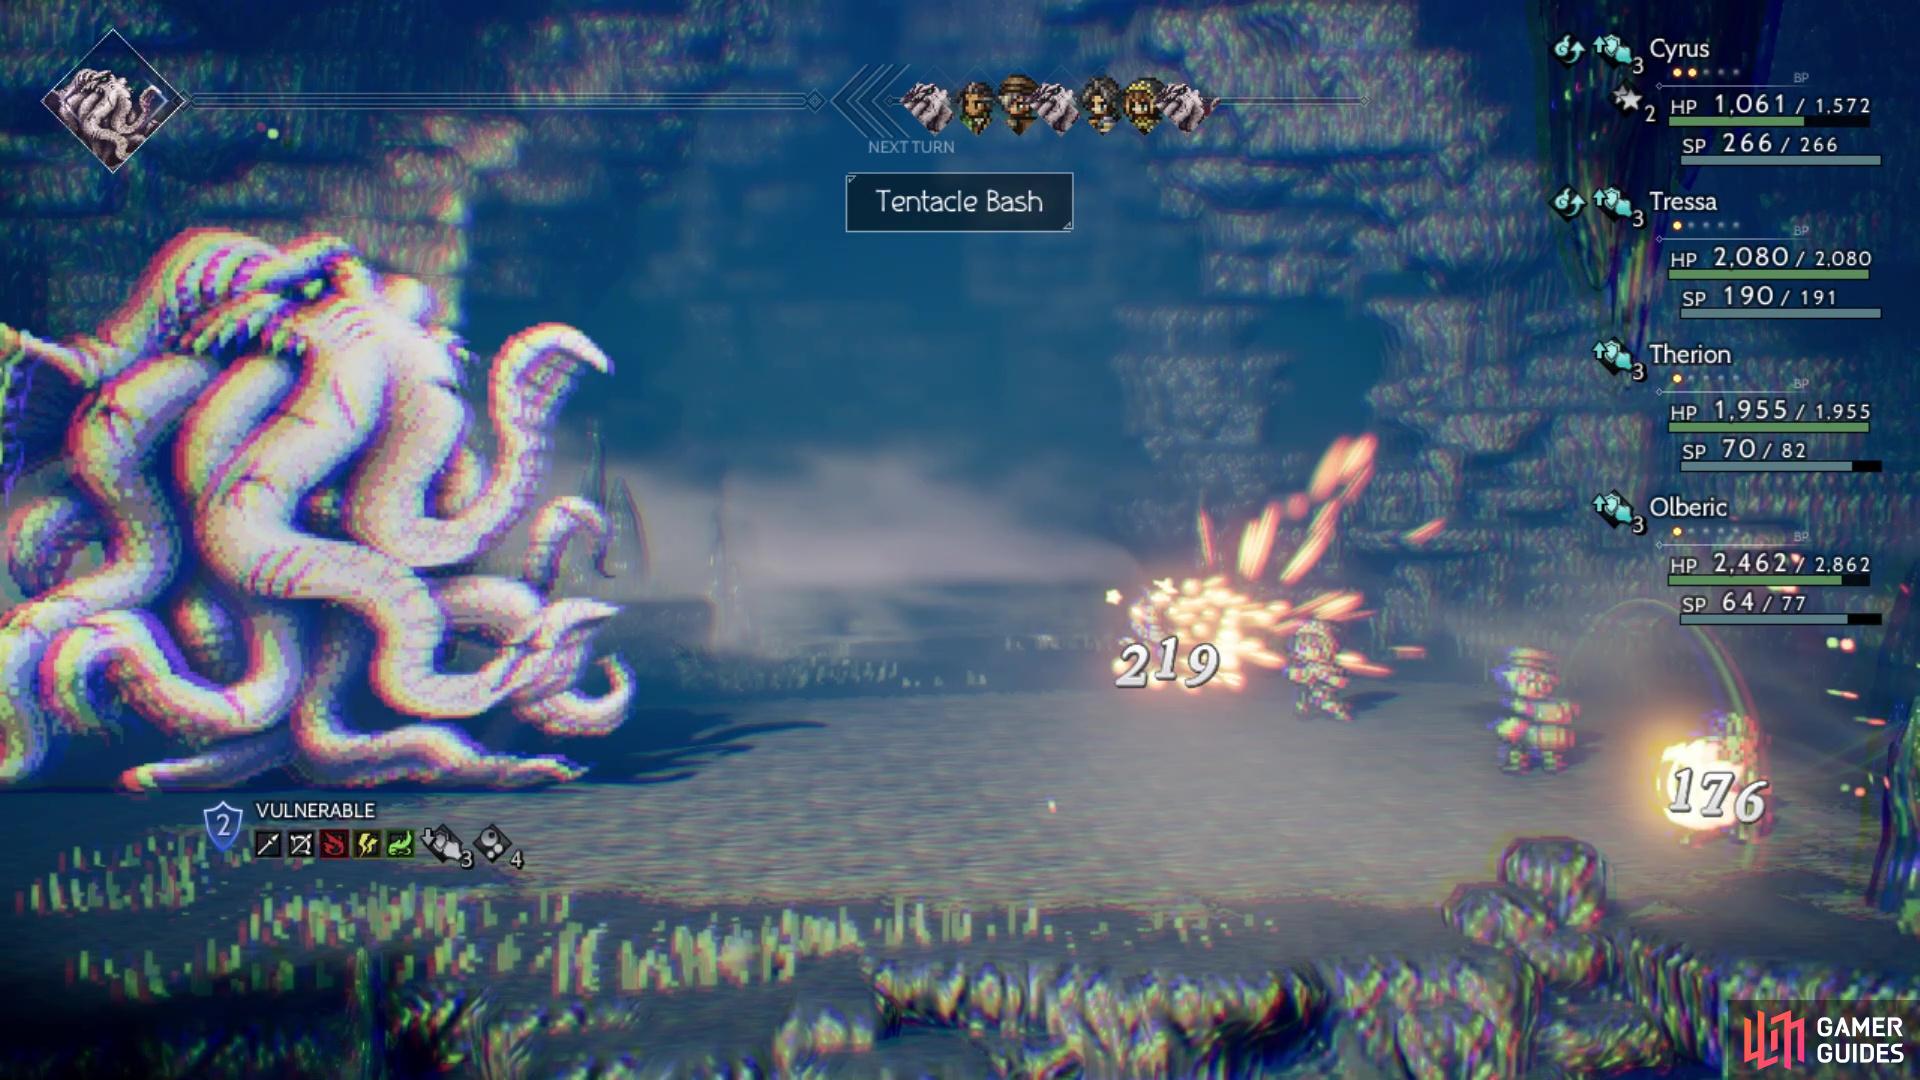 Tentacle Bash will hit random allies, so you may get unlucky